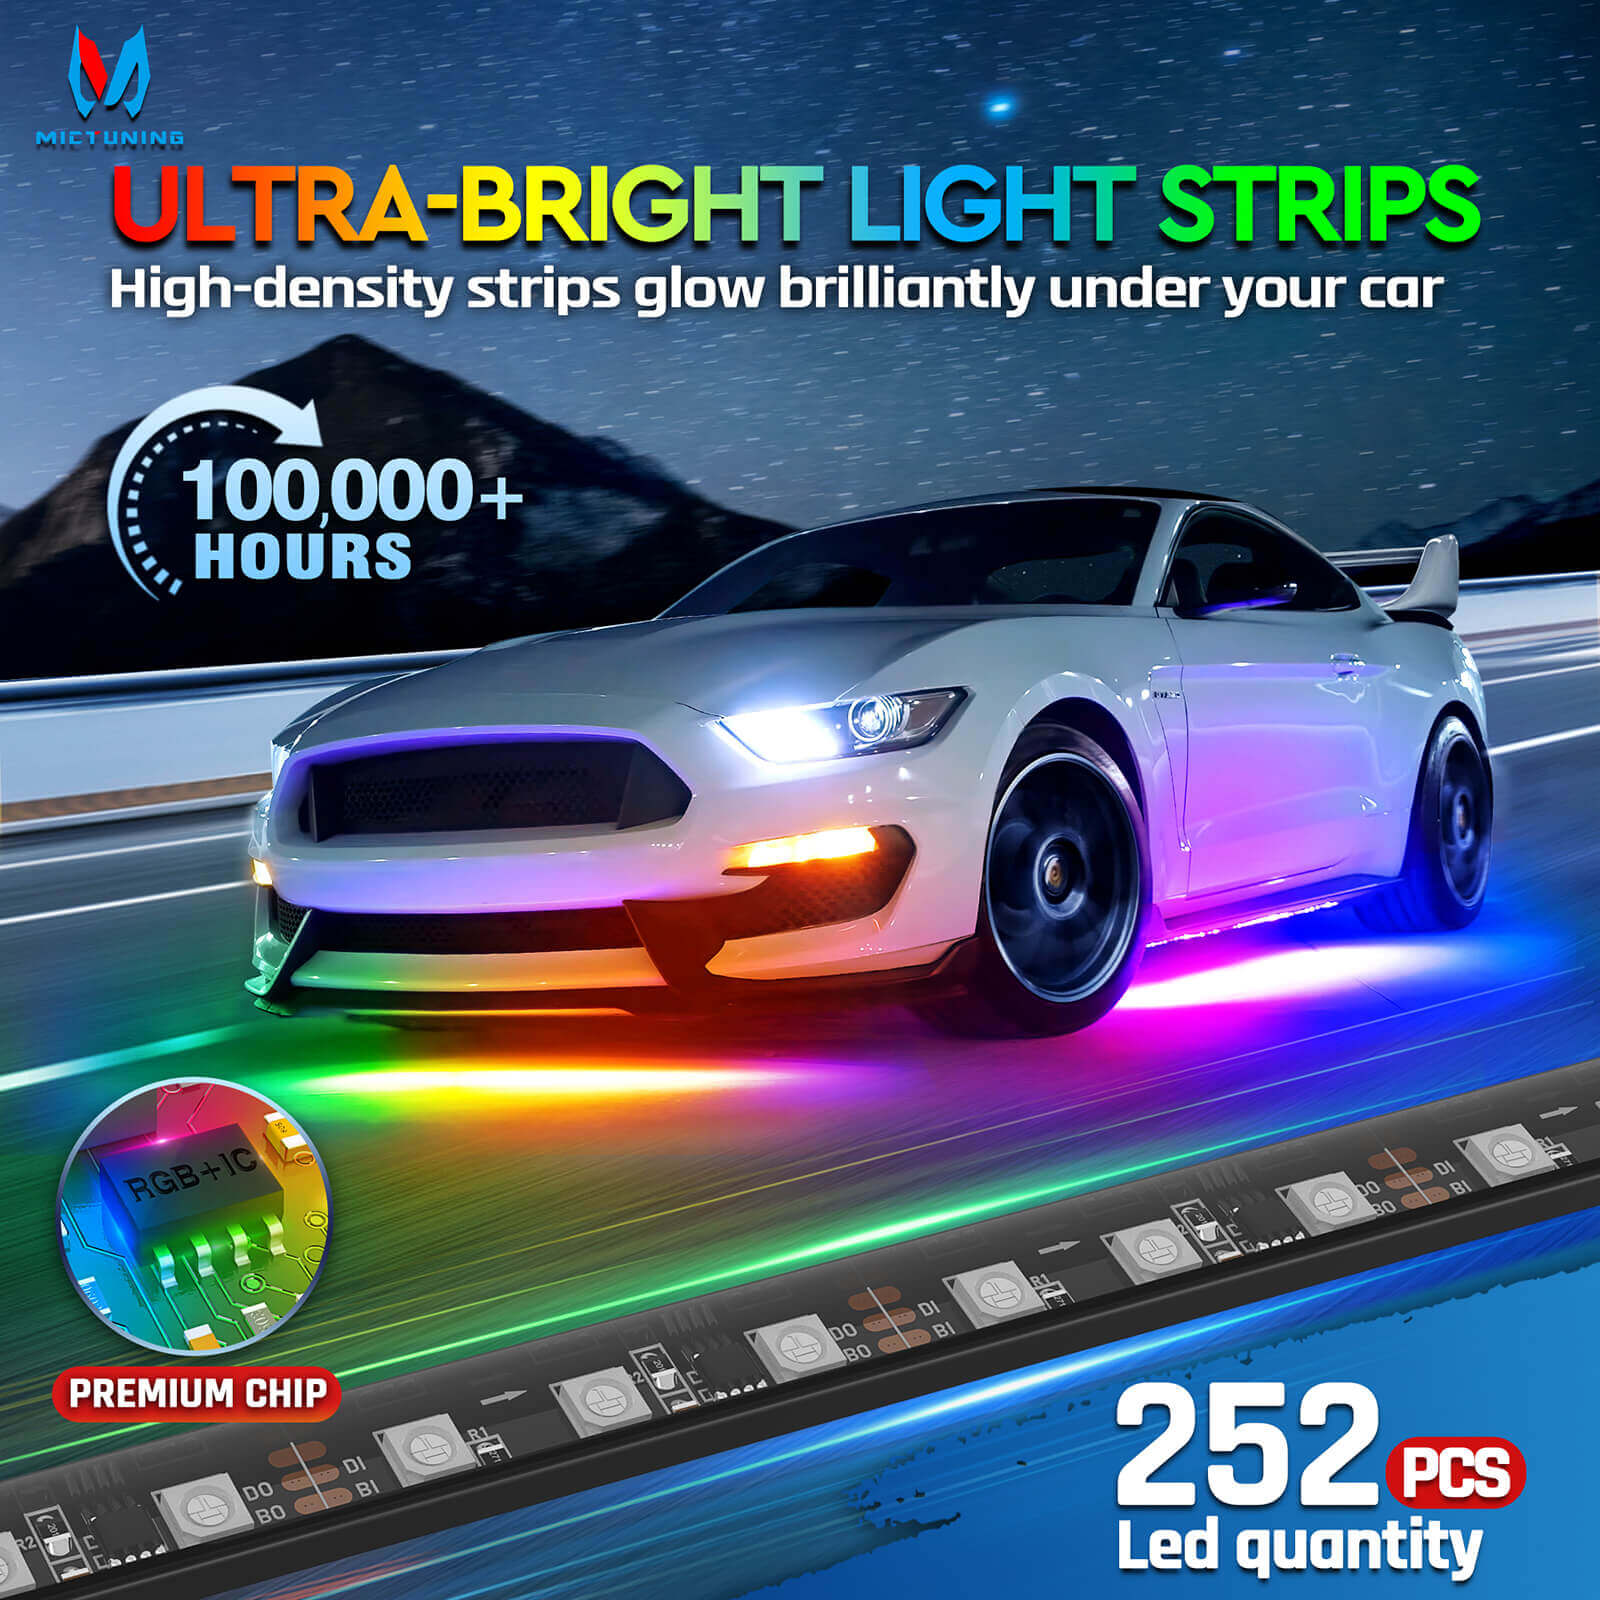 N3 Car Underglow Light Strip Kit, Chasing Dream Color RGB+IC LED, Wireless App Control, Set of 4 (2.9ft and 3.9ft)